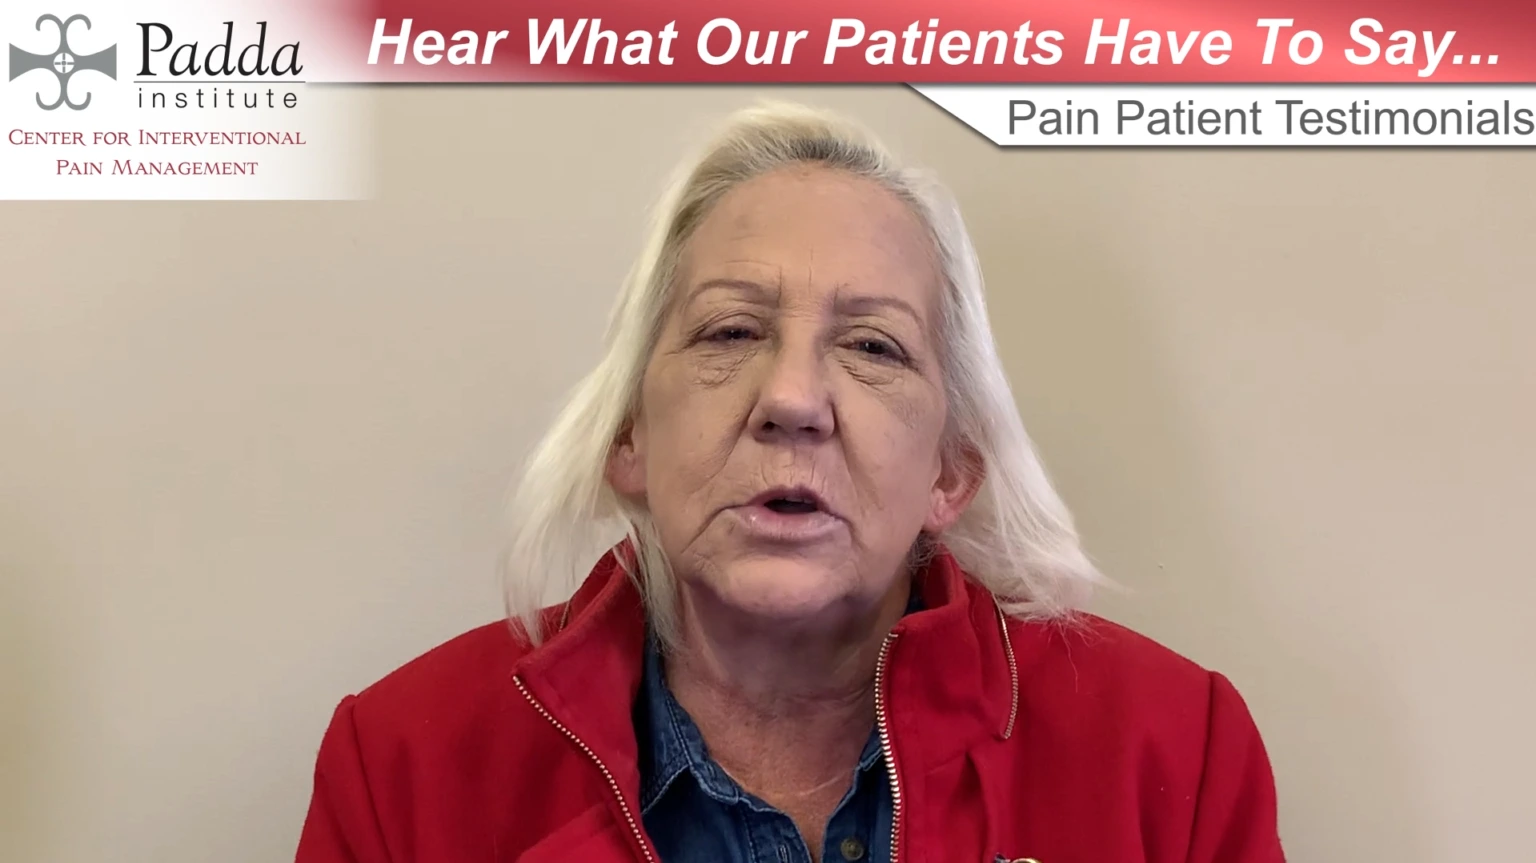 Real Patient Testimony on Pain Relief - Padda Institute